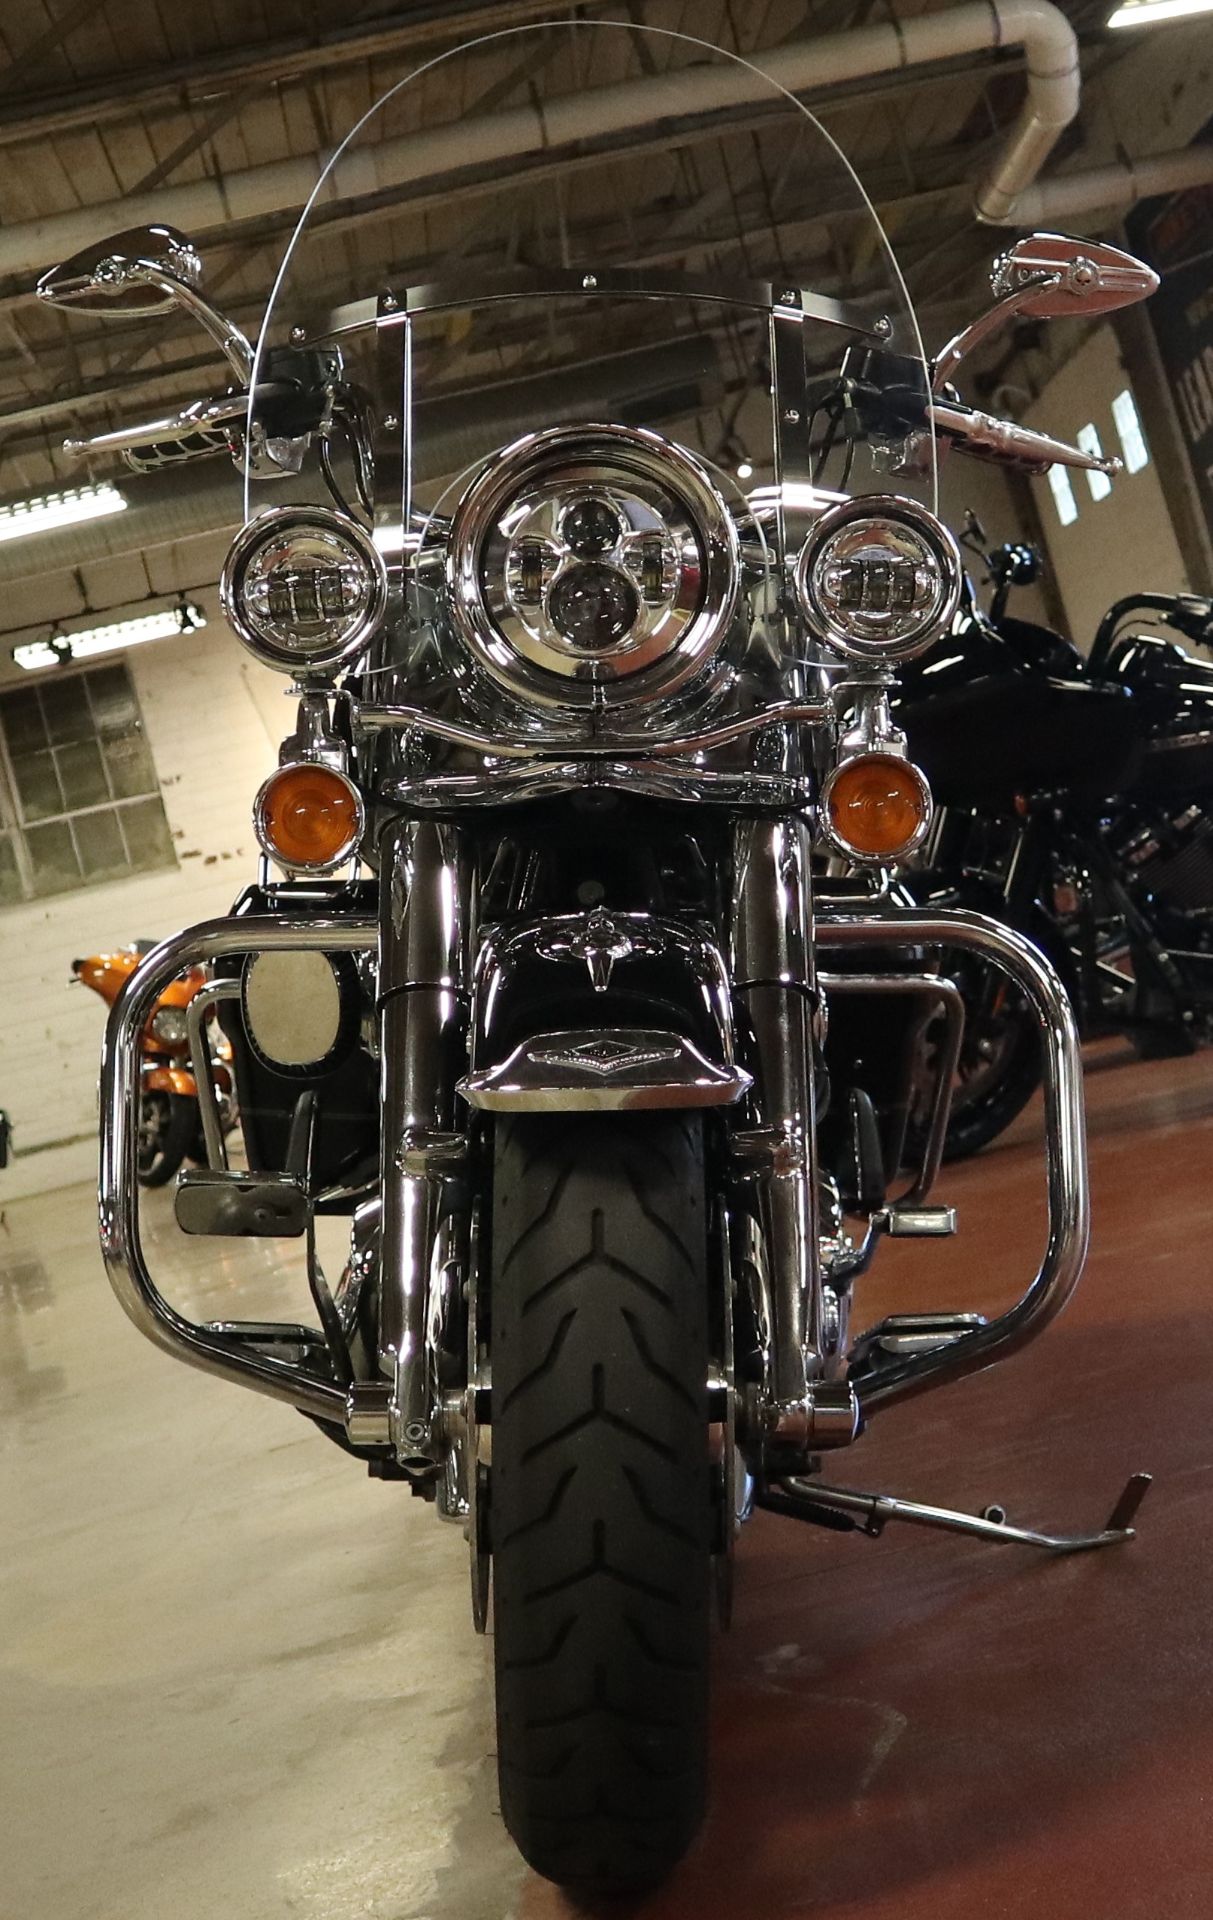 2017 Harley-Davidson Road King® in New London, Connecticut - Photo 3